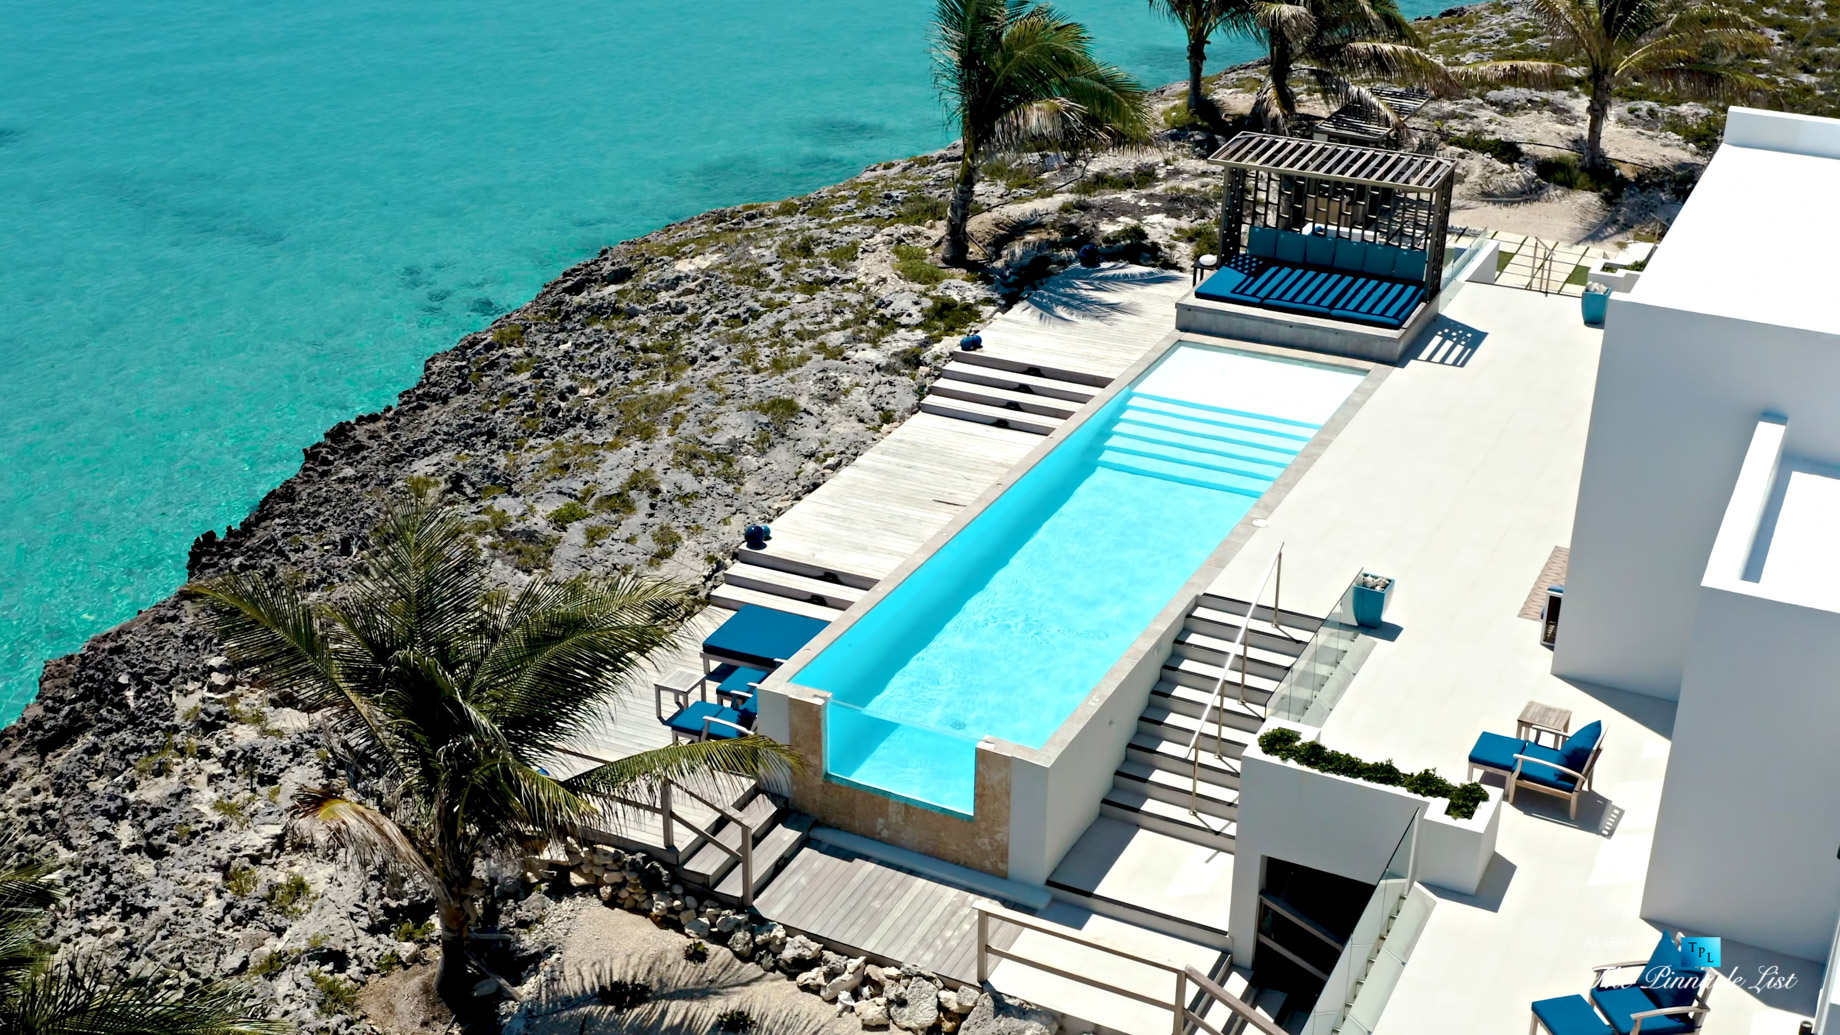 Tip of the Tail Villa - Providenciales, Turks and Caicos Islands - Drone Aerial Pool View - Luxury Real Estate - South Shore Peninsula Home